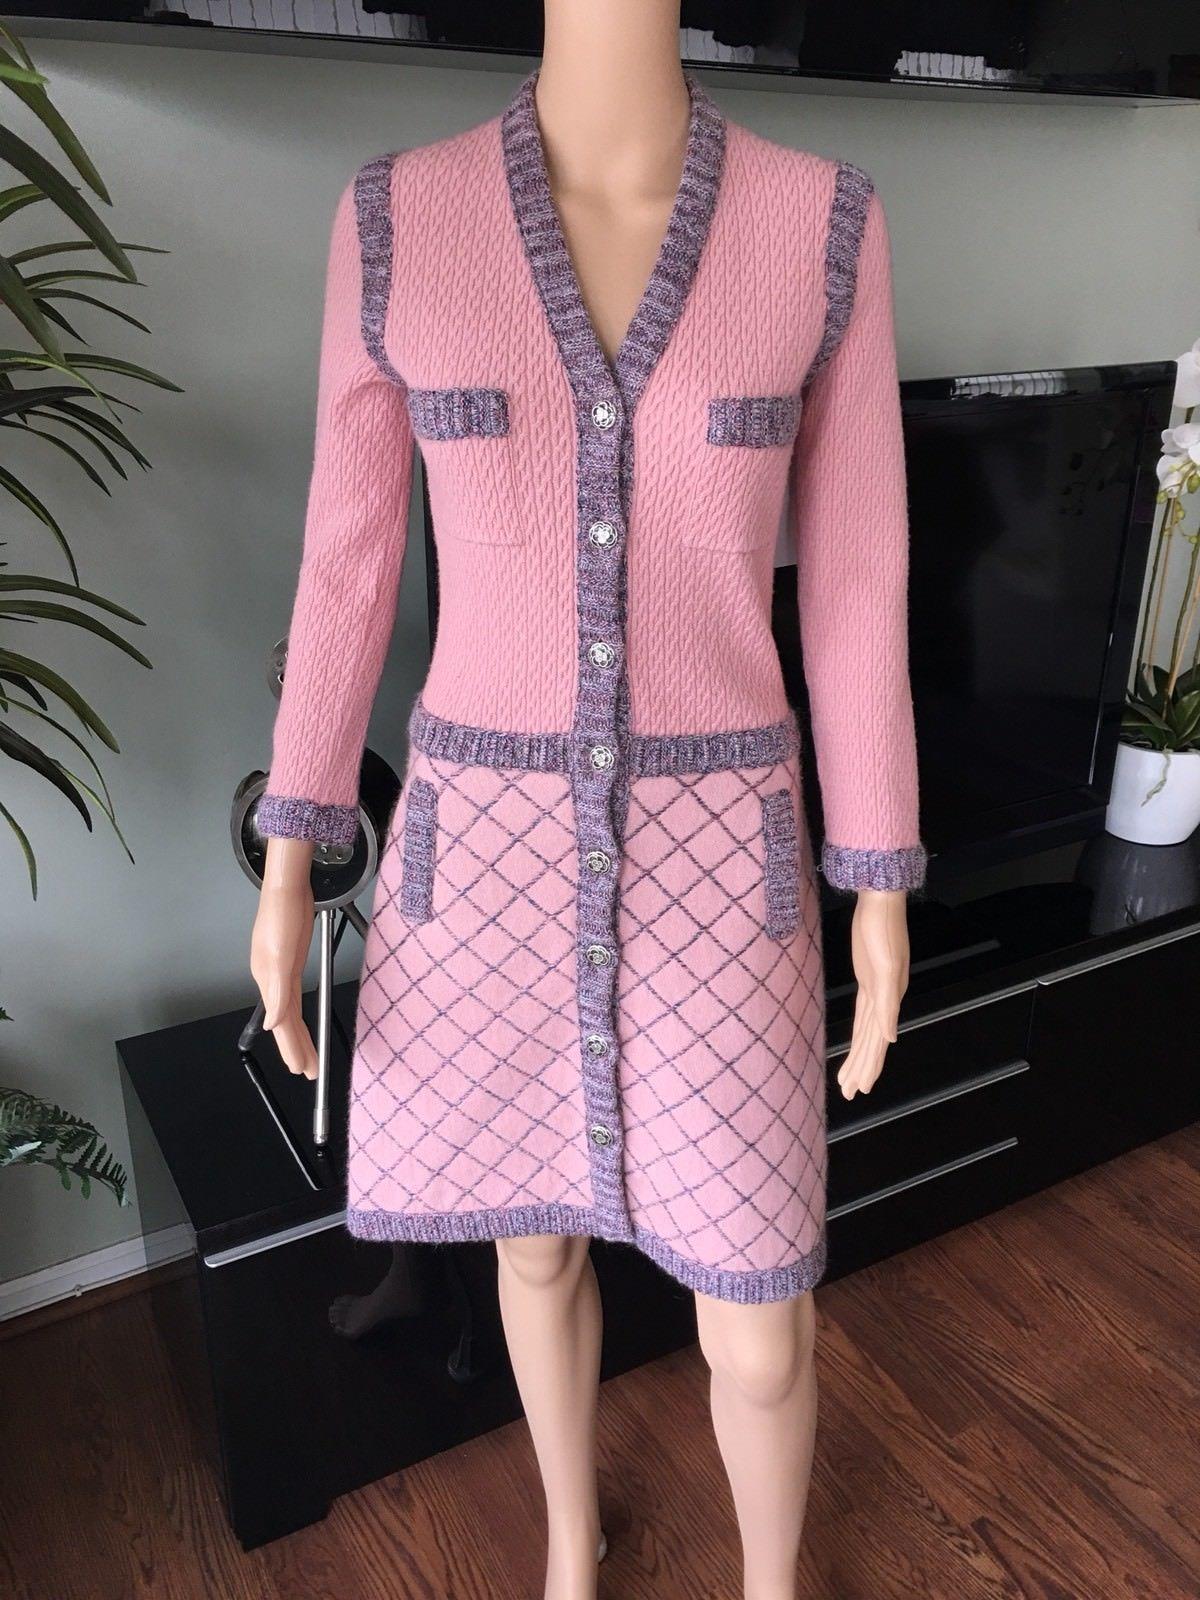 Chanel cashmere-blend heavy knit knee-length dress with dual patch pockets at bust, diamond pattern at skirt featuring dual pockets at hips and interlocking CC camellia button closures at center front. Condition - Like New Flawless 

ABOUT